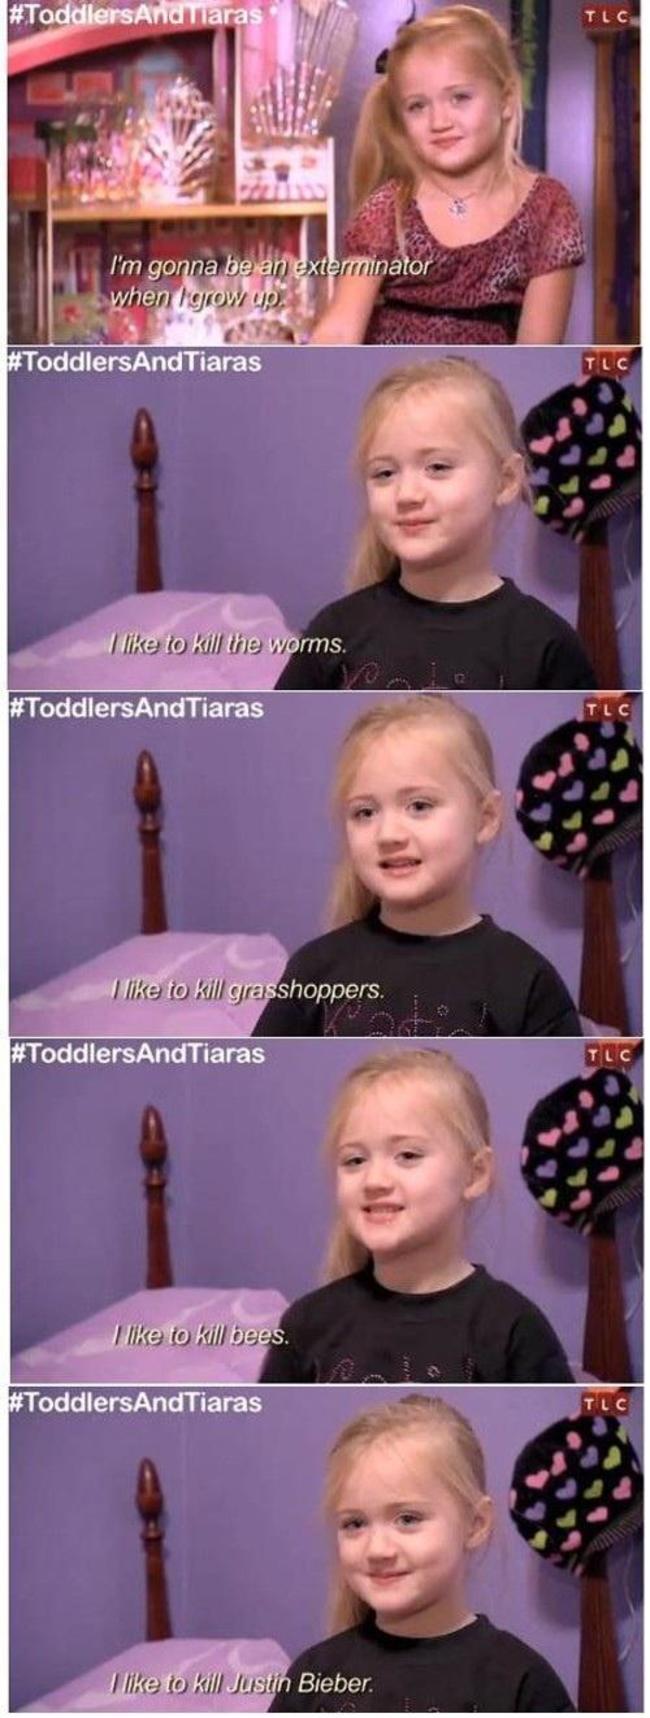 Toddlers & Tiaras - Tlc I'm gonna be an exterminator when I grow up I to kill the worms. to kill grasshoppers. I to kill bees. I to kill Justin Bieber.